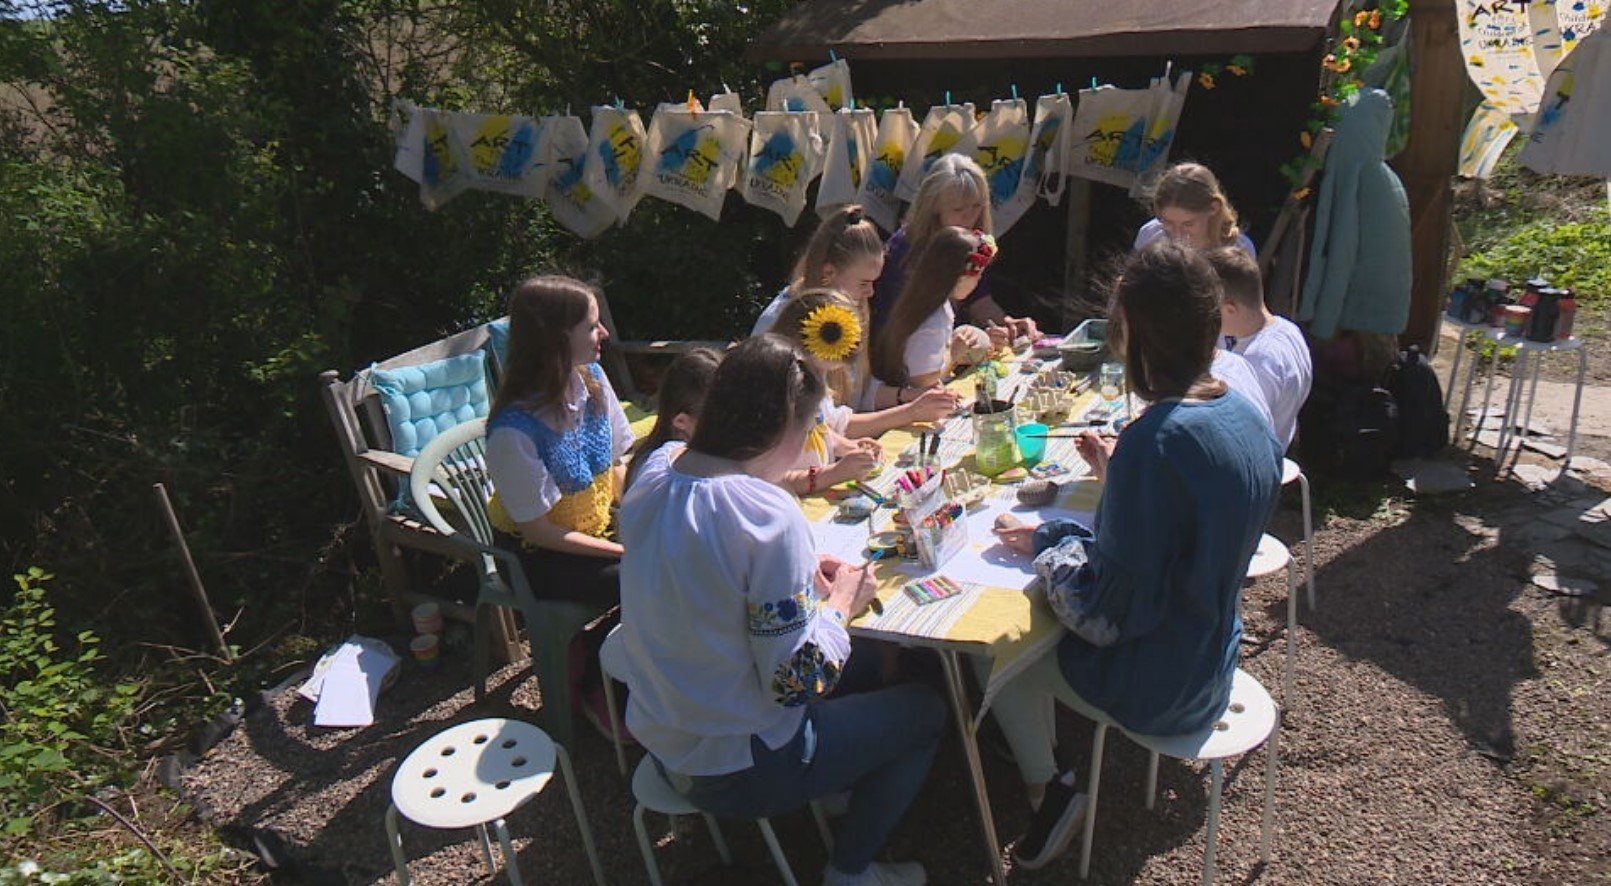 Families got together to create art ahead of Ukrainian Mother's Day on Sunday